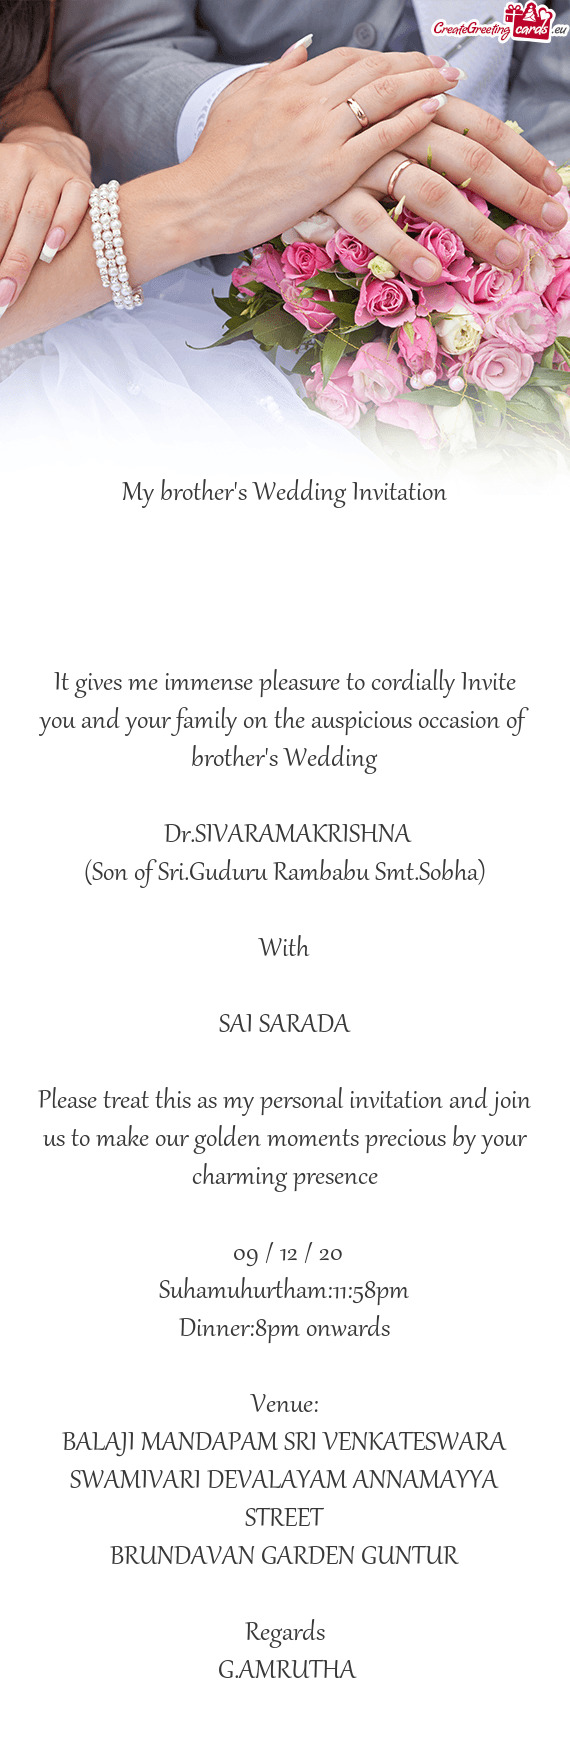 It gives me immense pleasure to cordially Invite you and your family on the auspicious occasion of b